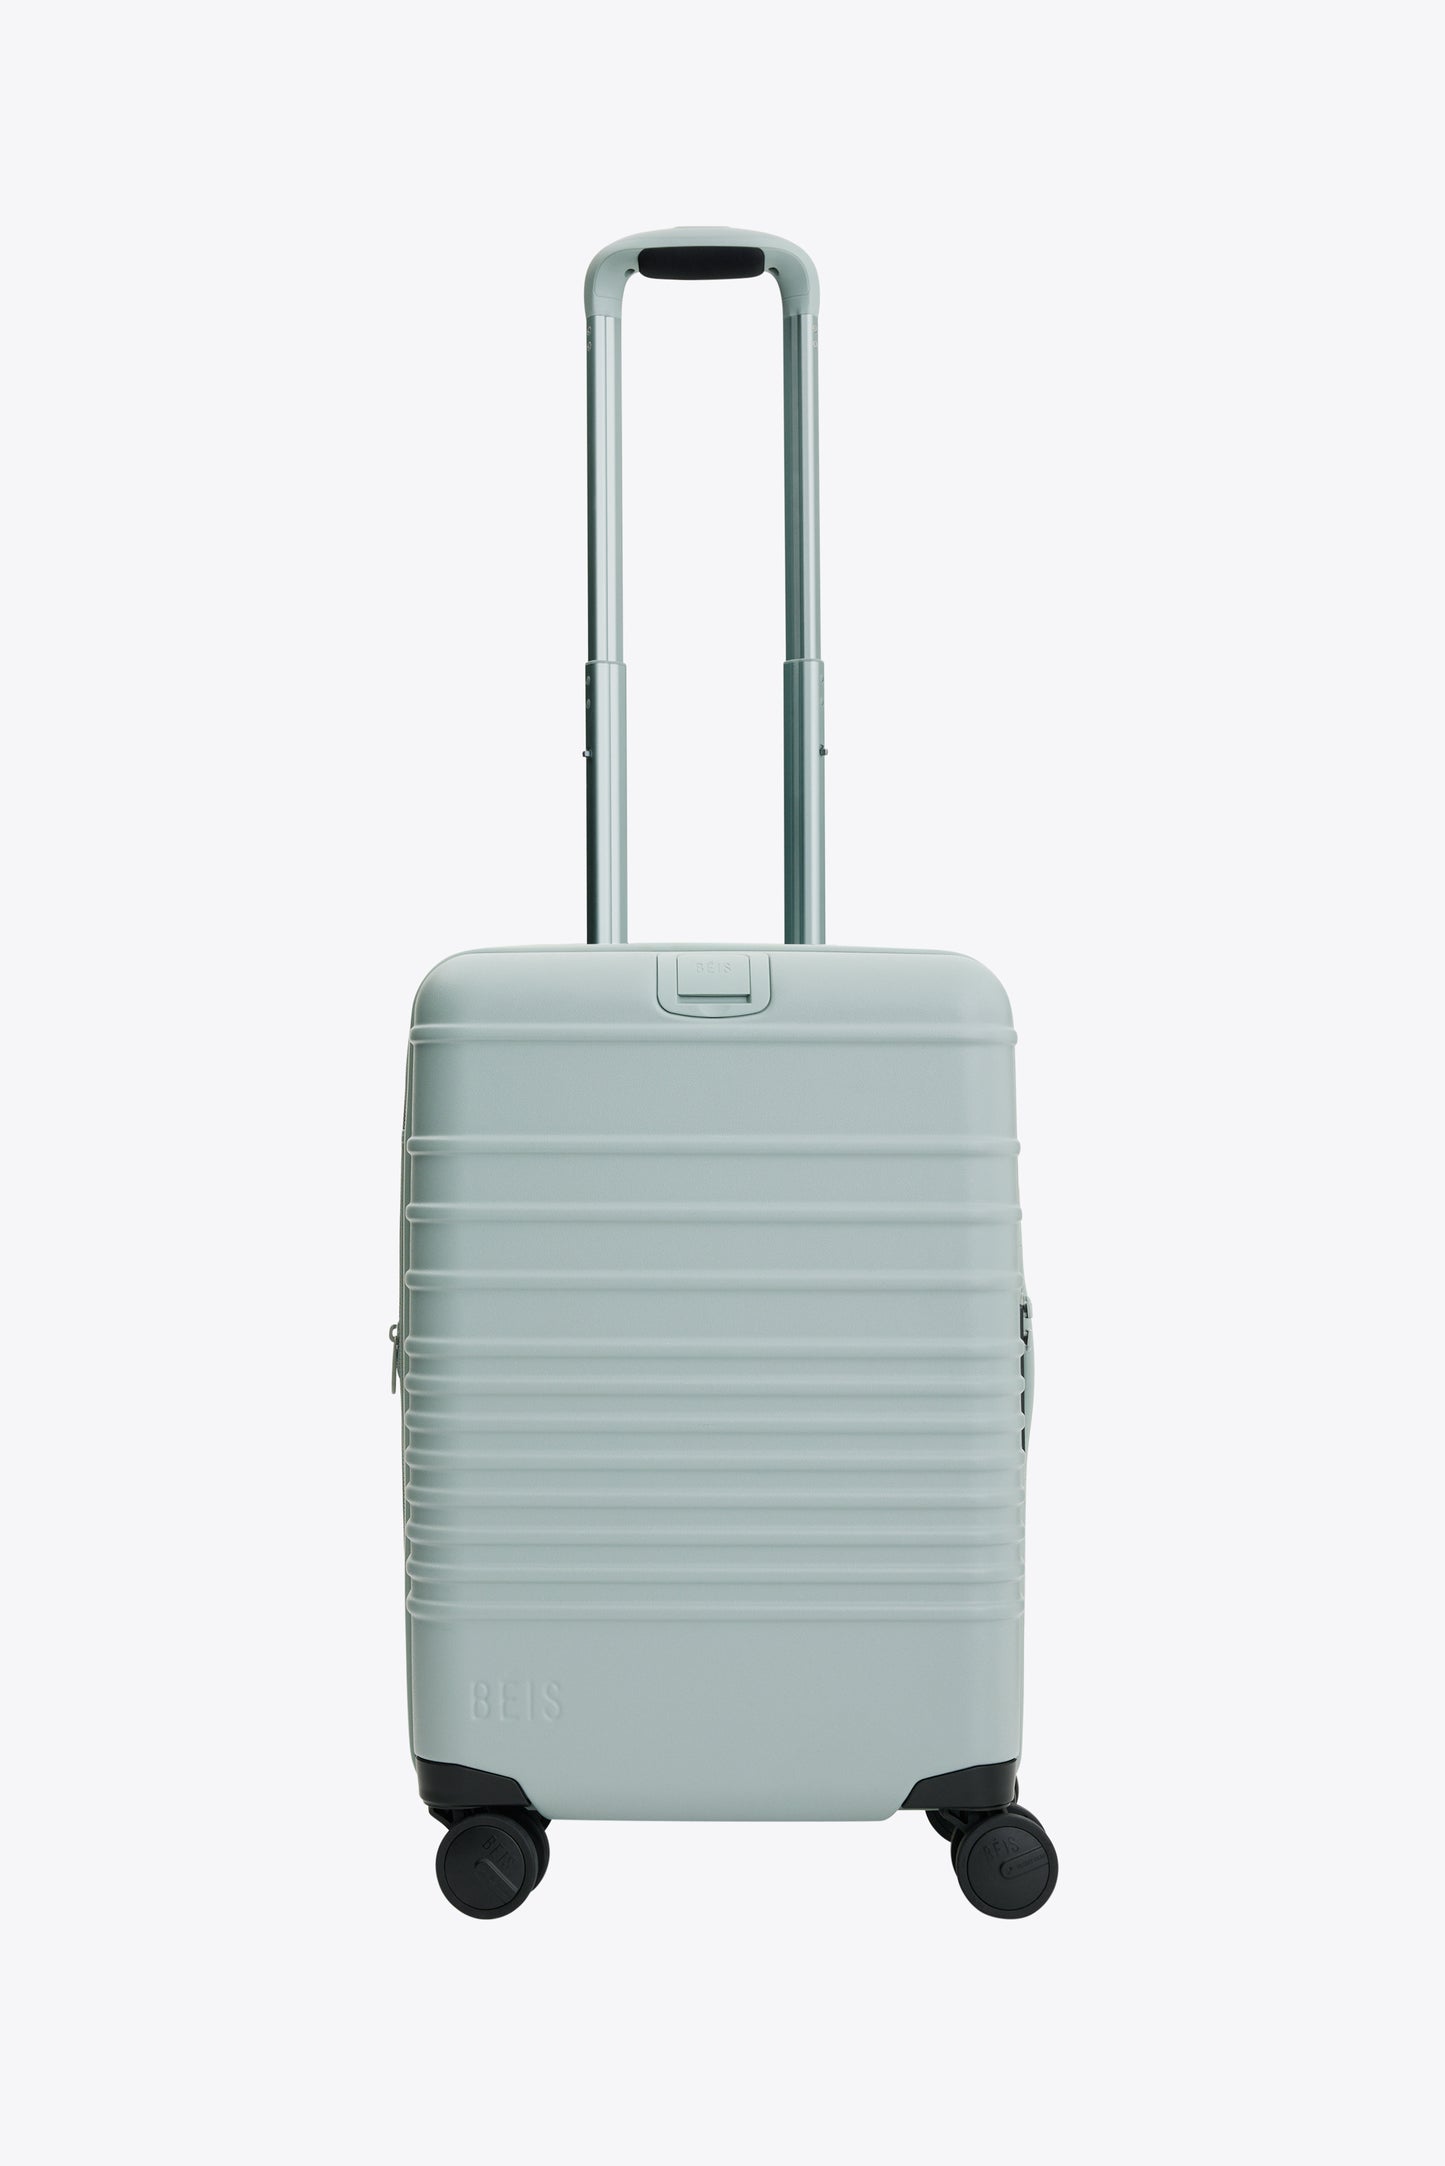 The Carry-On Roller in Slate